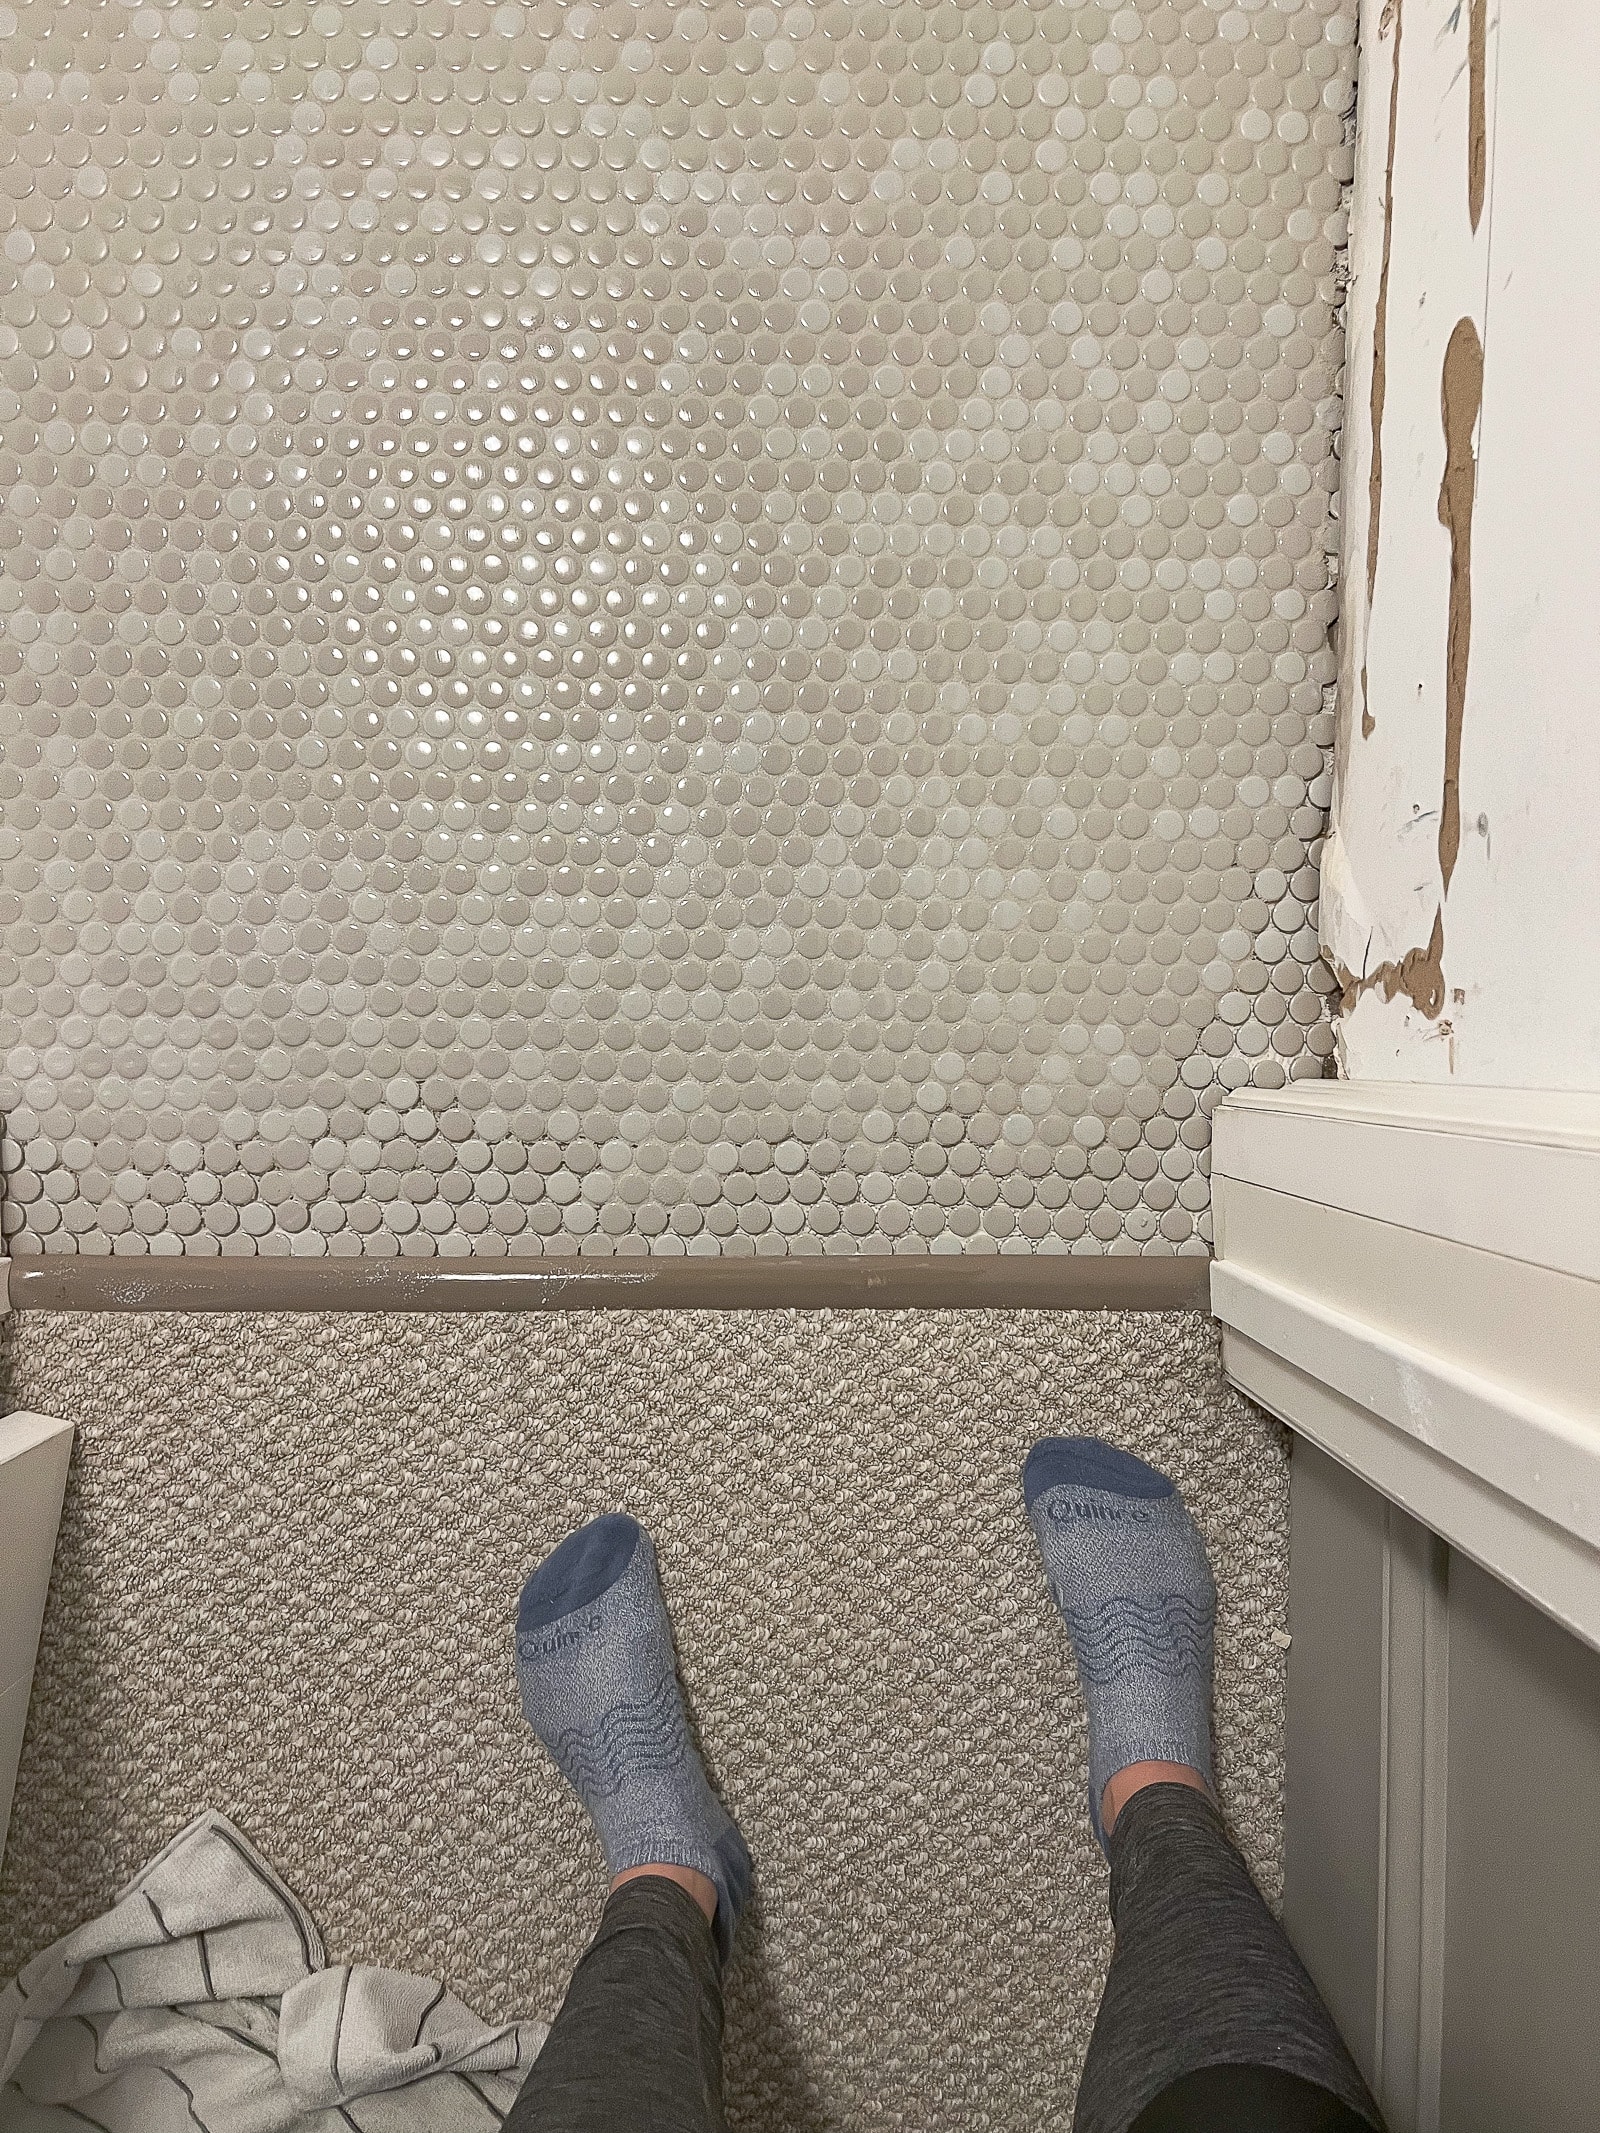 Running out of grout near the door